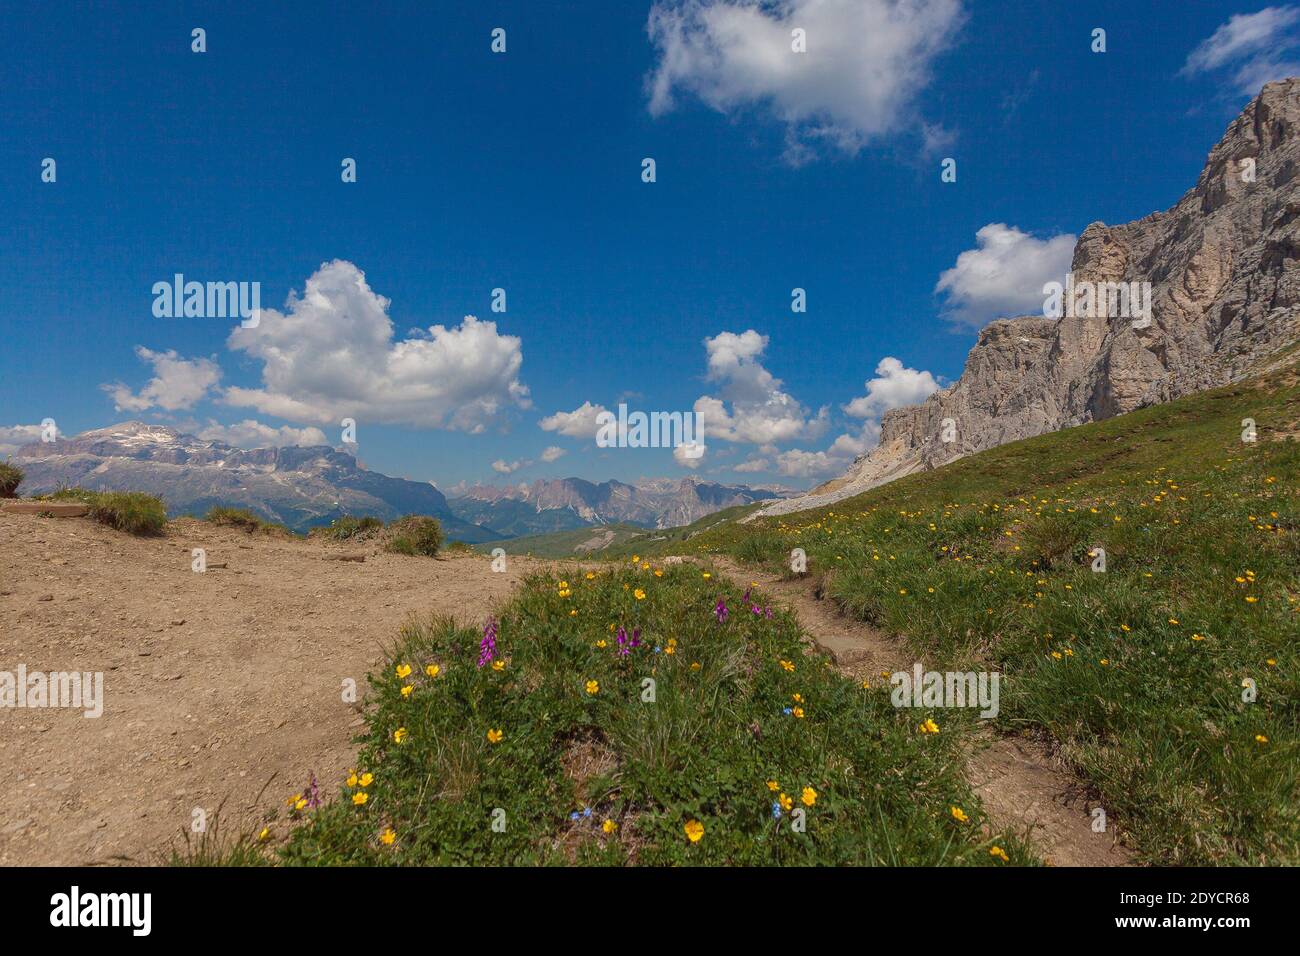 Flowery meadow with the Sella massif and Settsass walls in the background, Dolomites, Italy Stock Photo